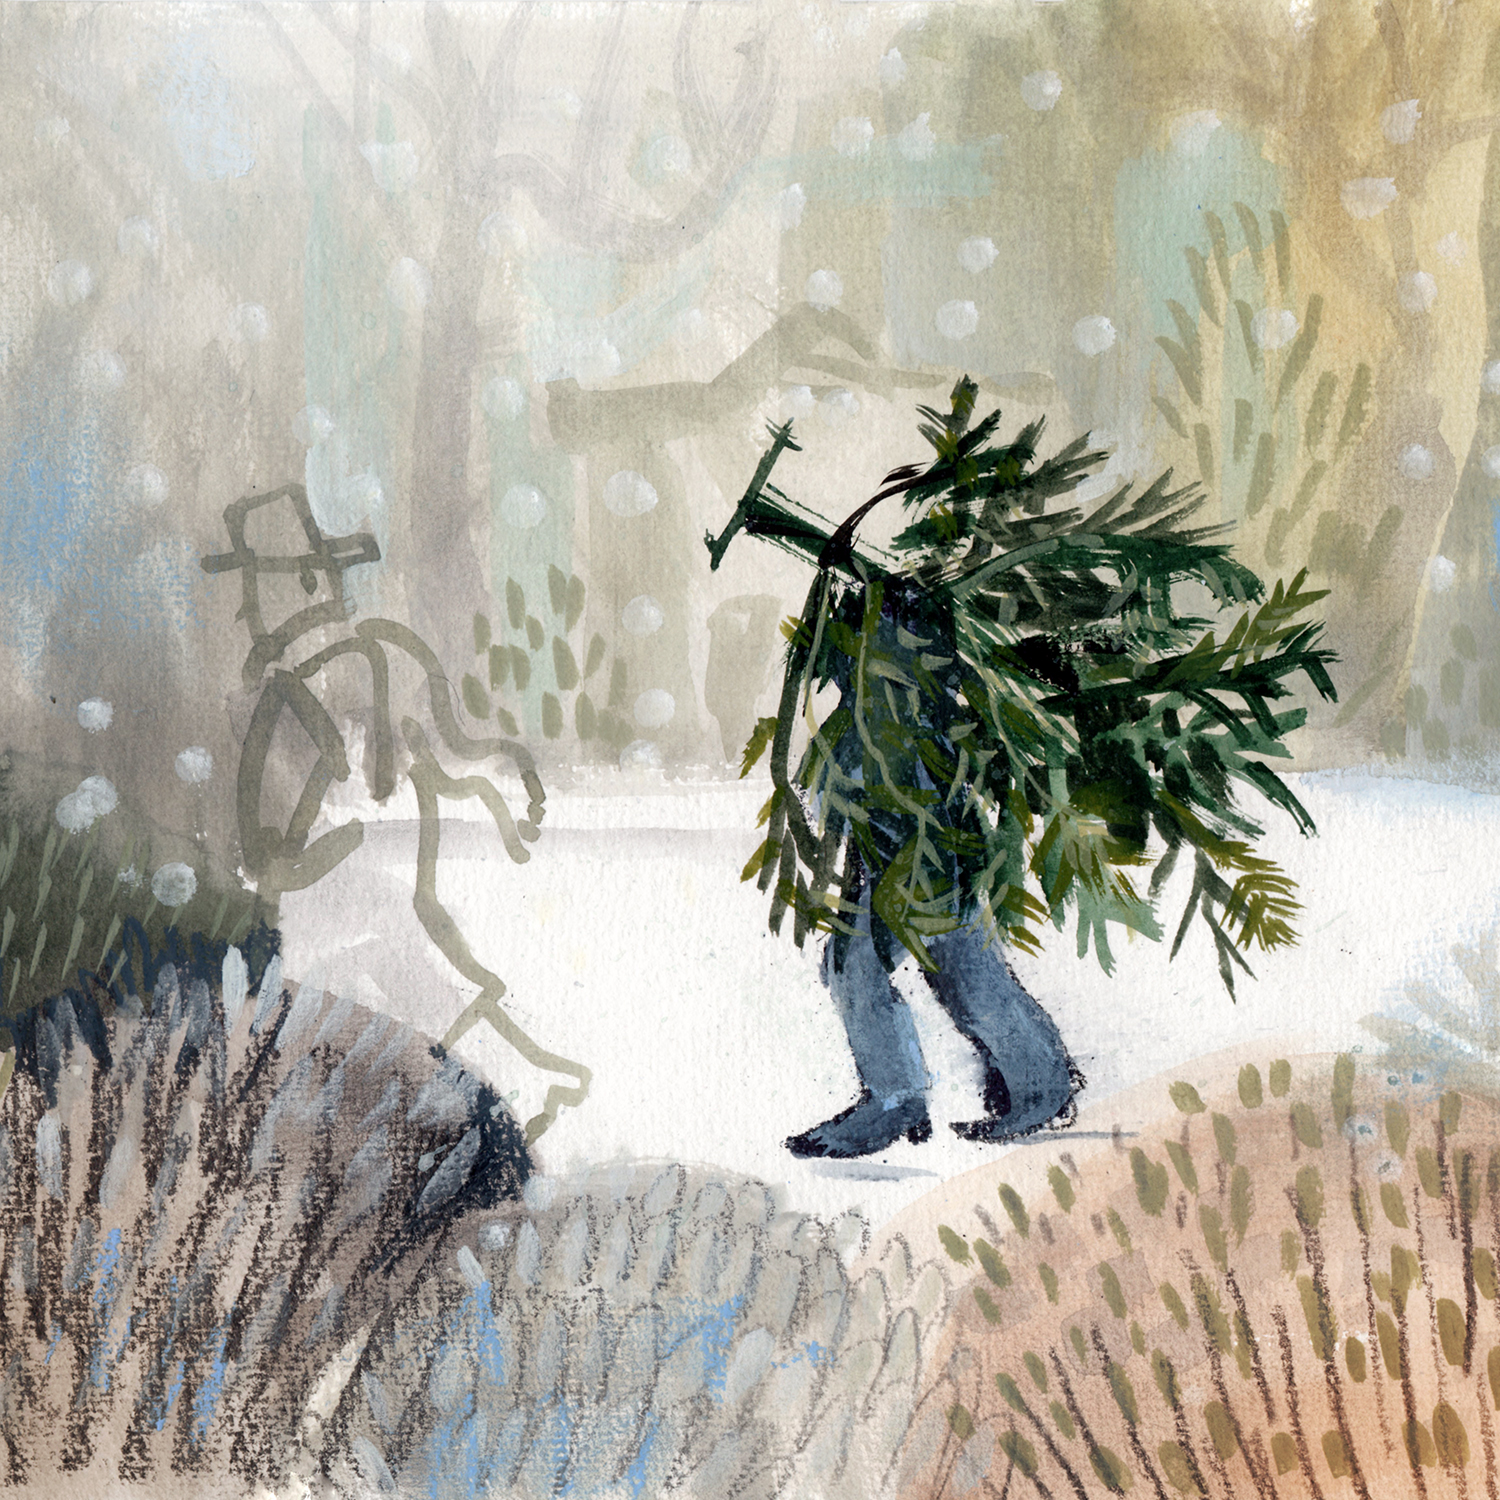 Oldschool illustrated outfit, person carrying a Christmas tree home, www.Fenne.be